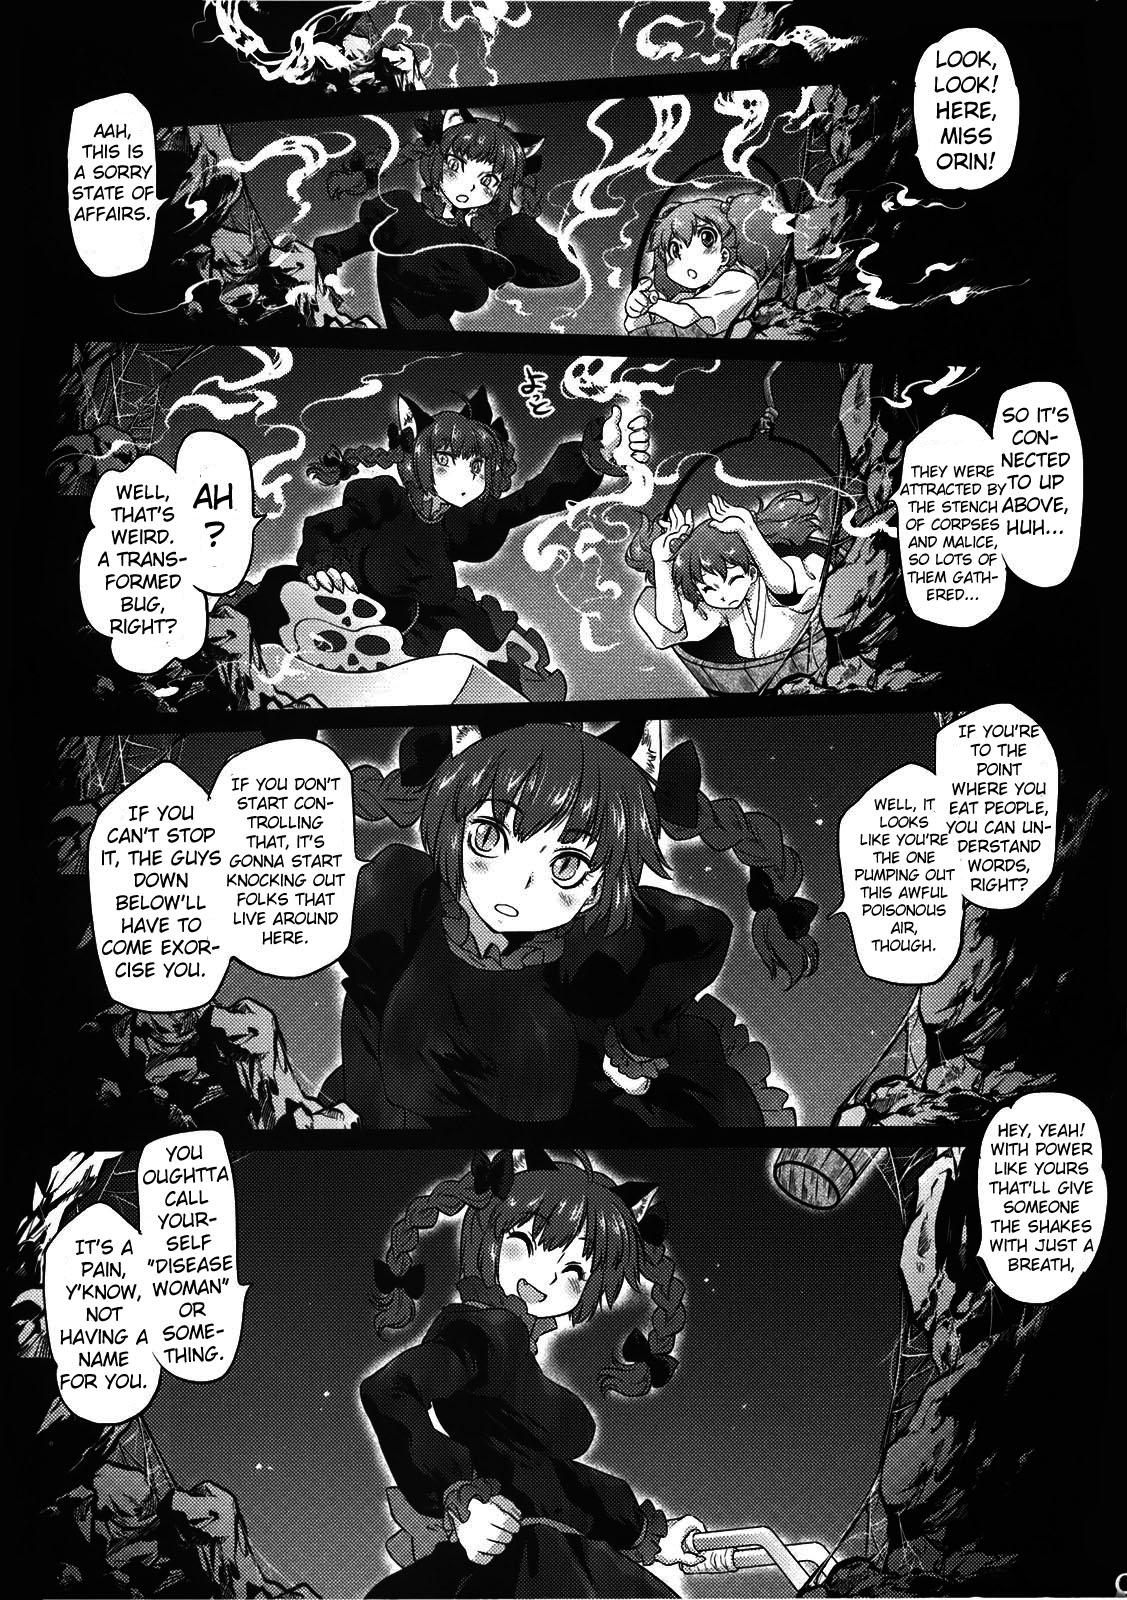 Little A Disease Woman's Story - Touhou project Step Mom - Page 9